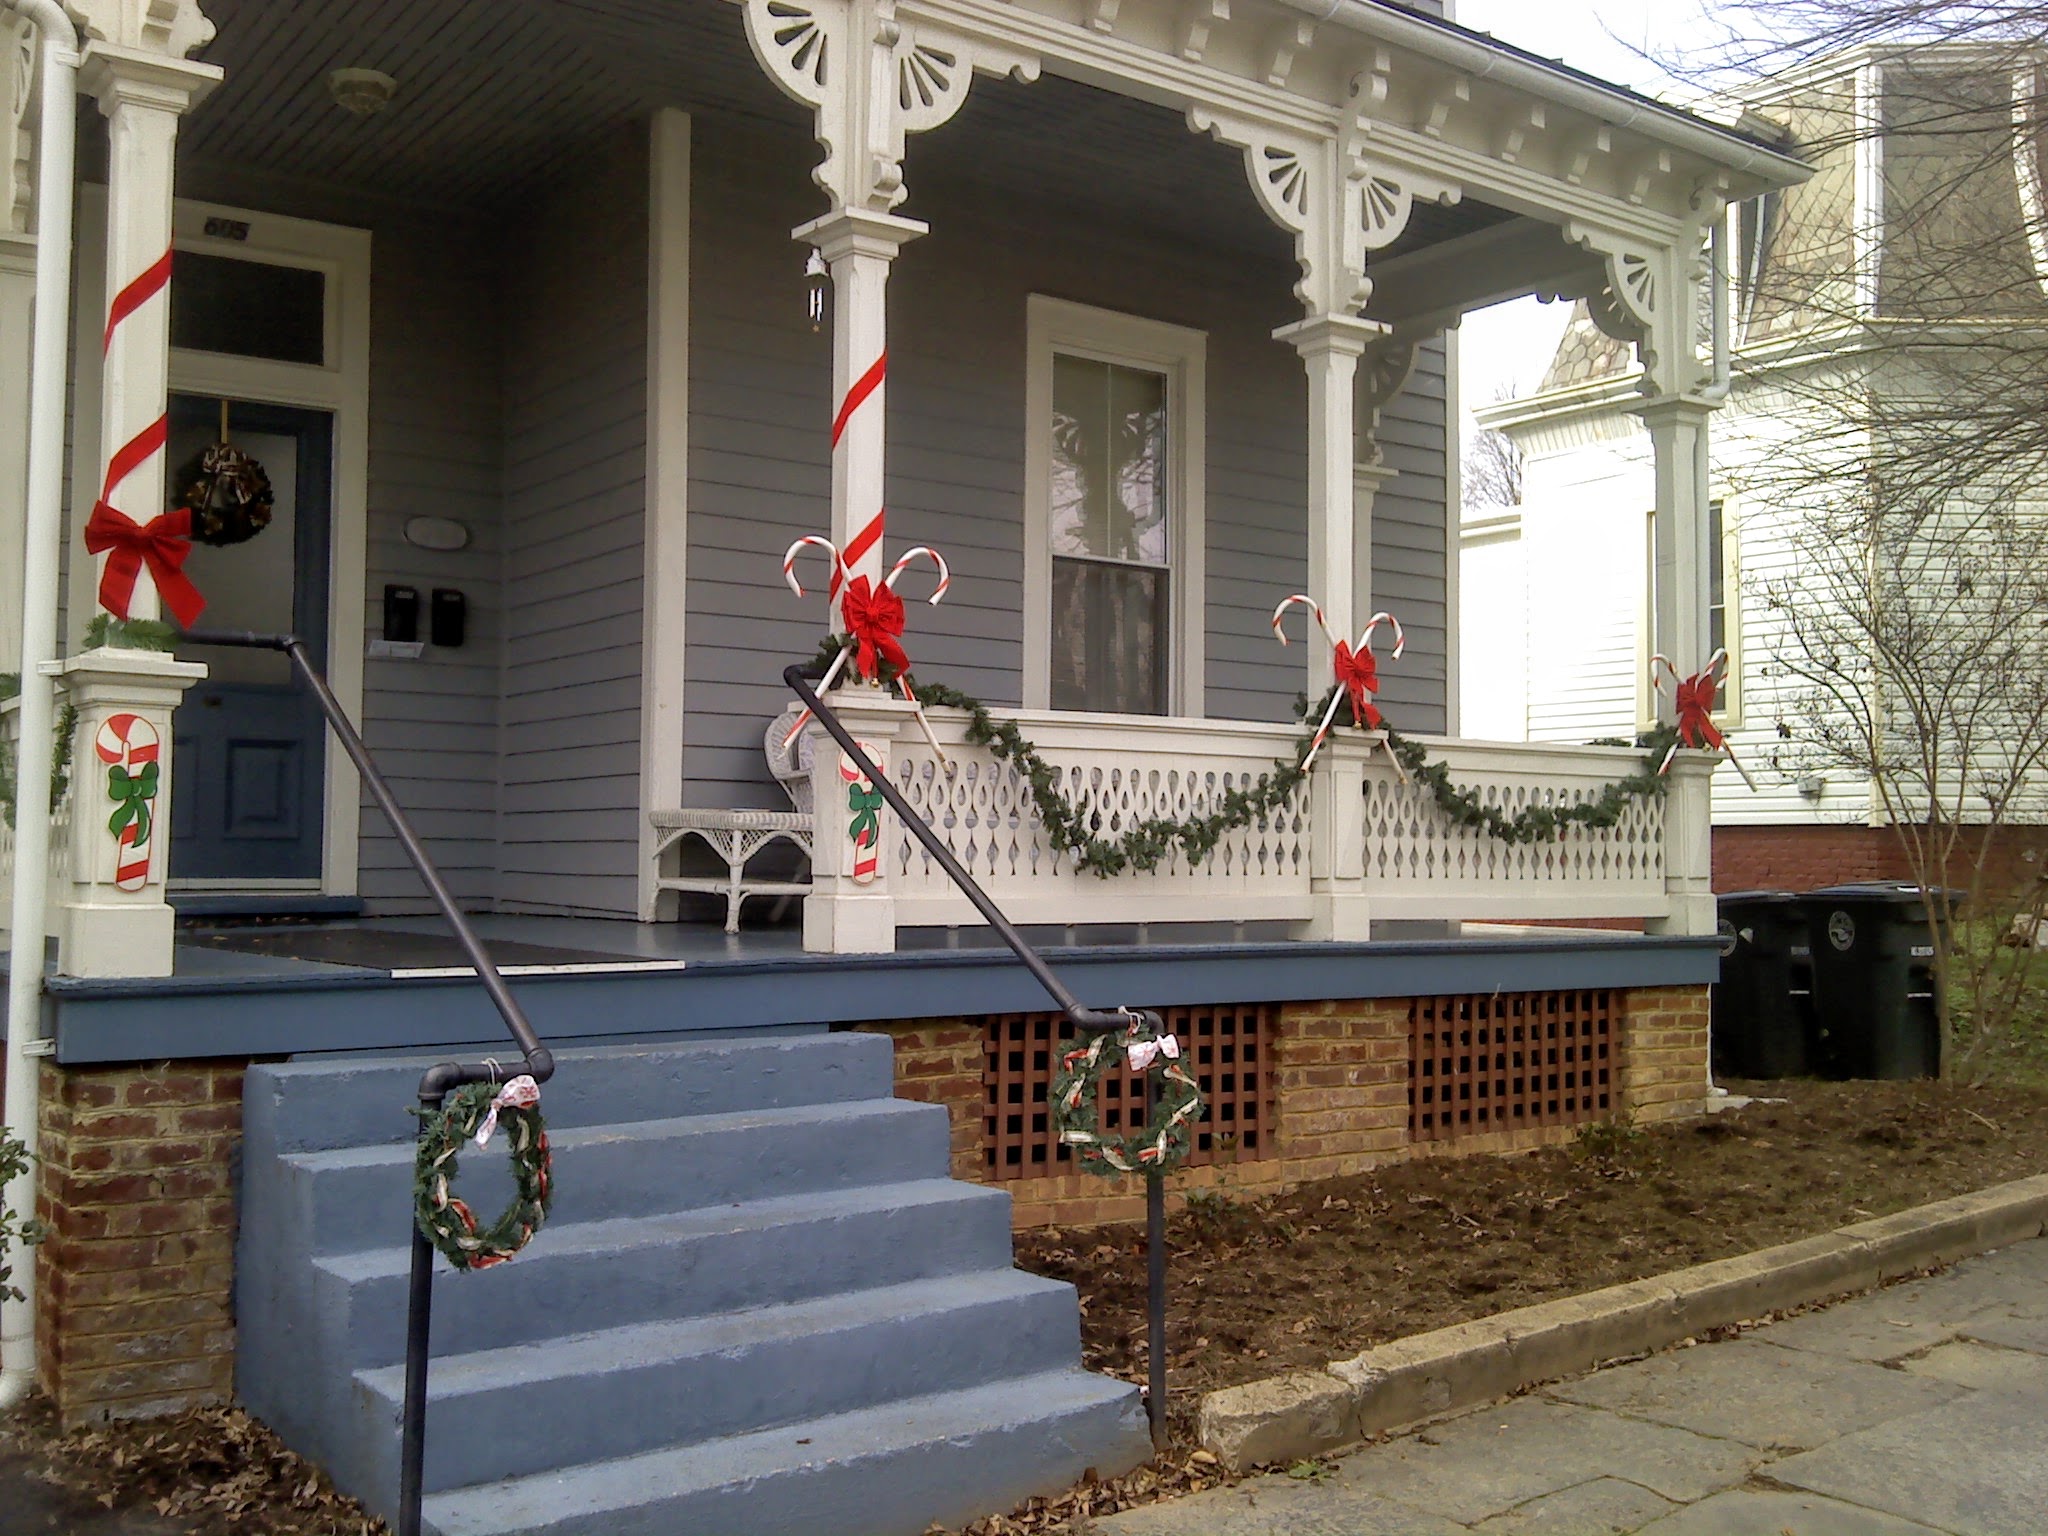 Harrison Street Duplex decorated for Christmas